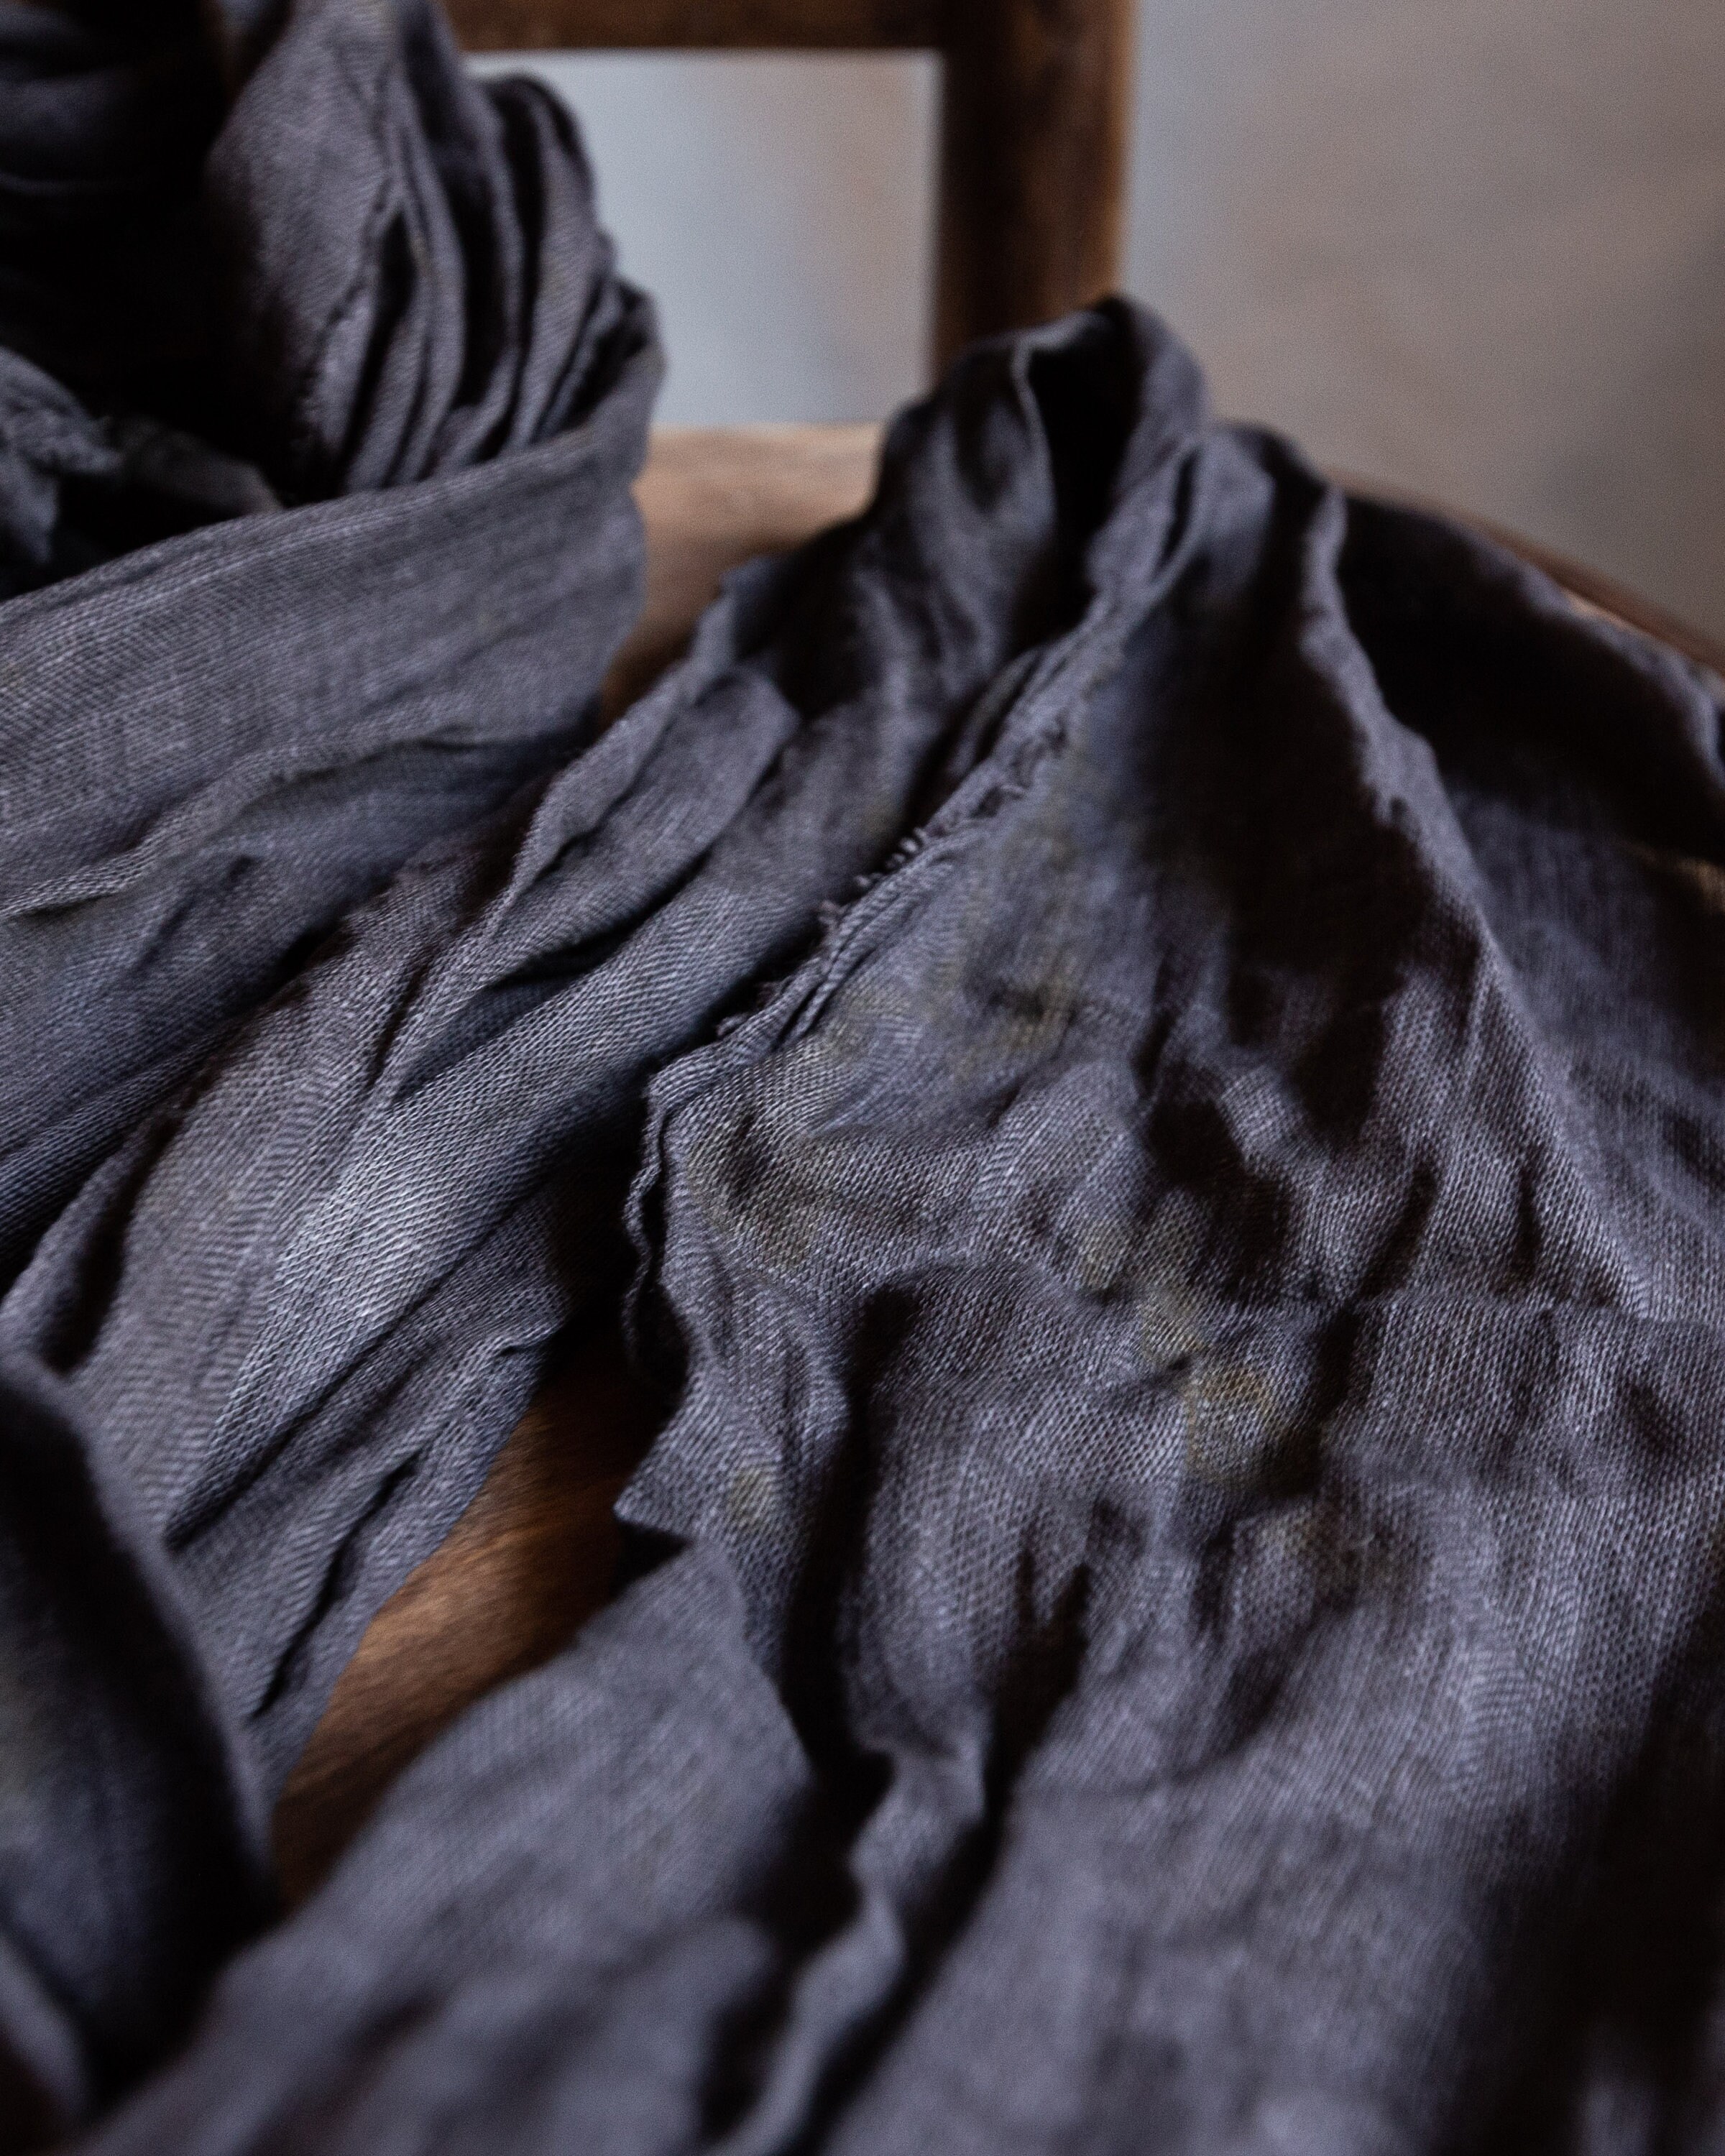 Naturally dyed linen scarf AIR. Dark grey navy hand dyed | Etsy